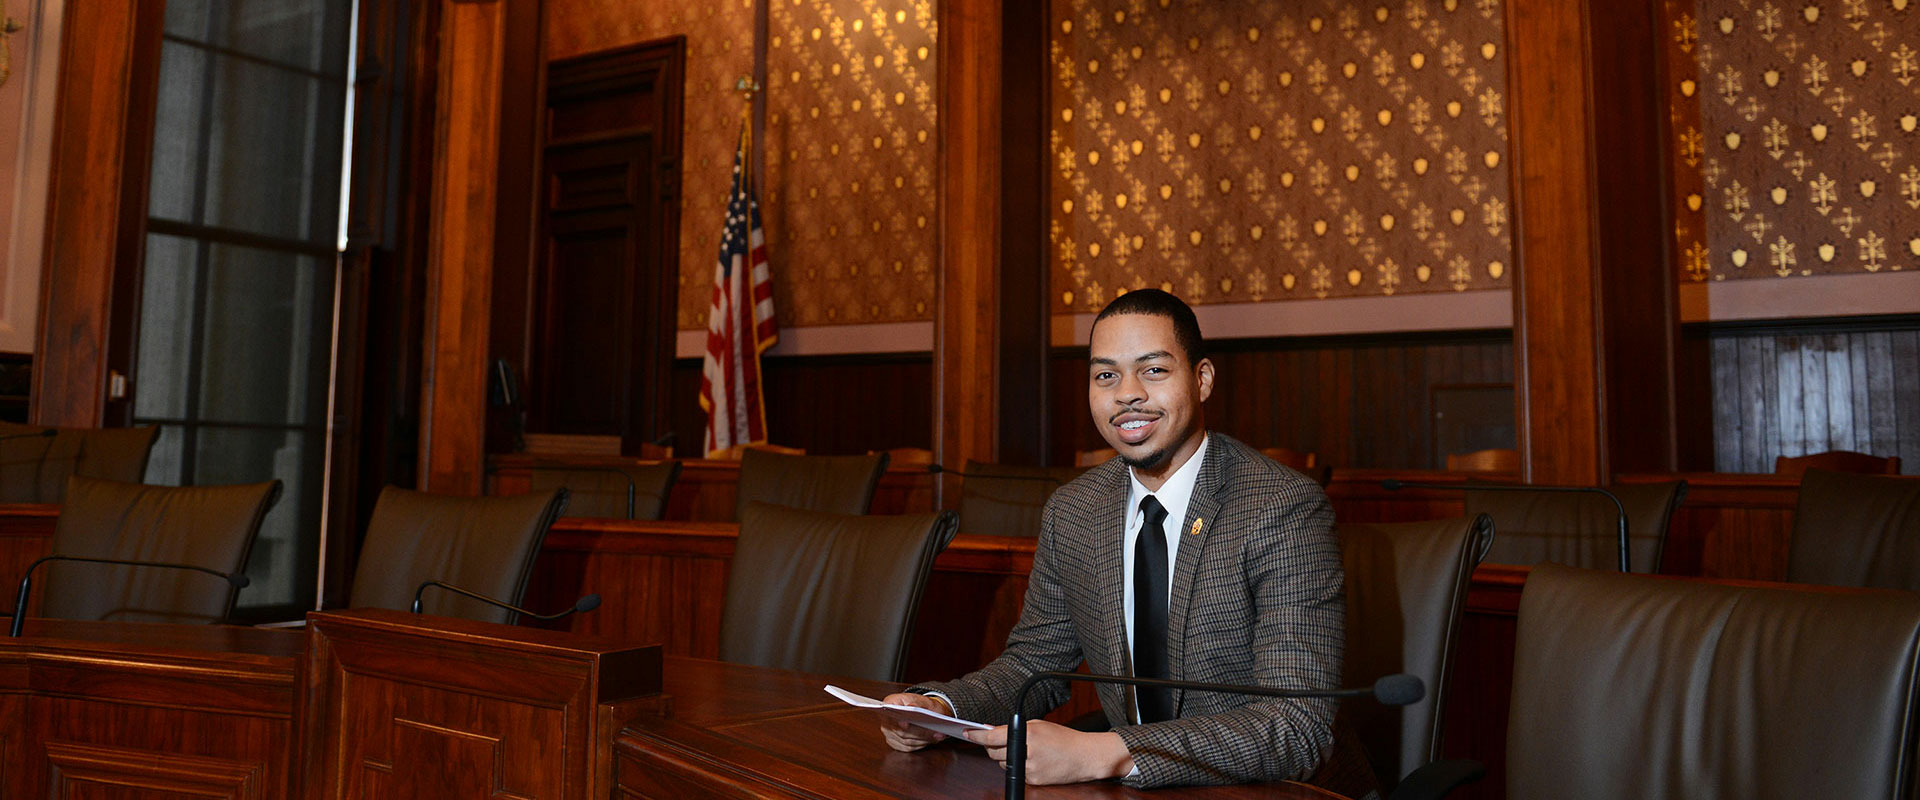 Student Intern in committee room at Illinois capital